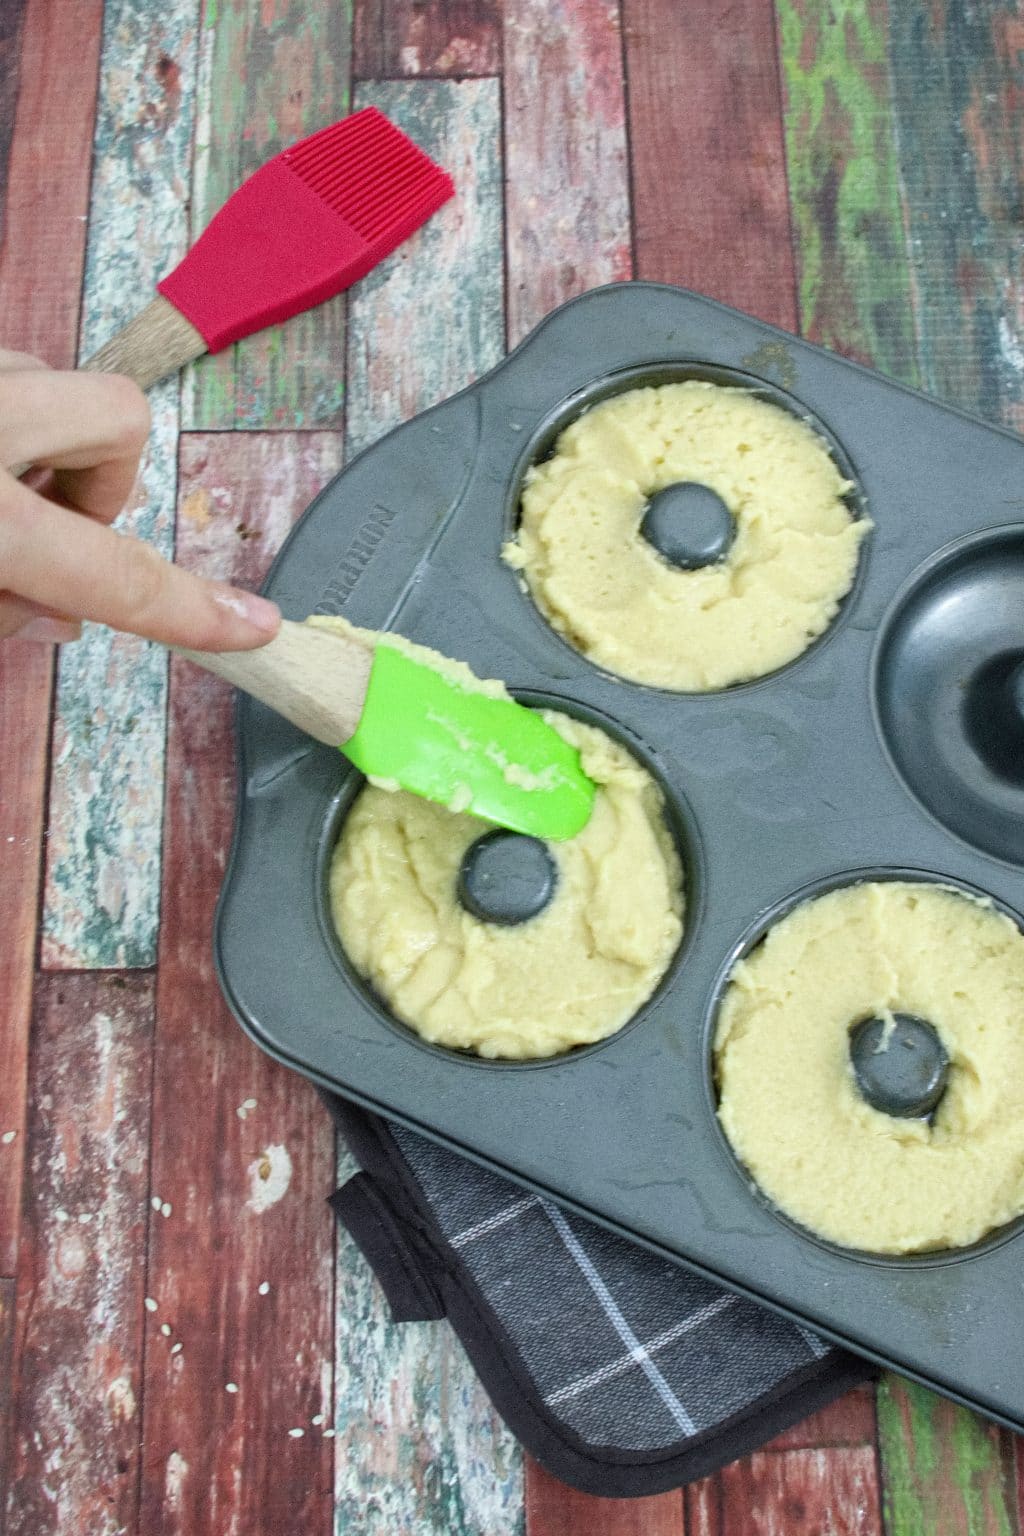 Donut tray with homemade bagels in it and a green silicone spatula pressing the bagels down